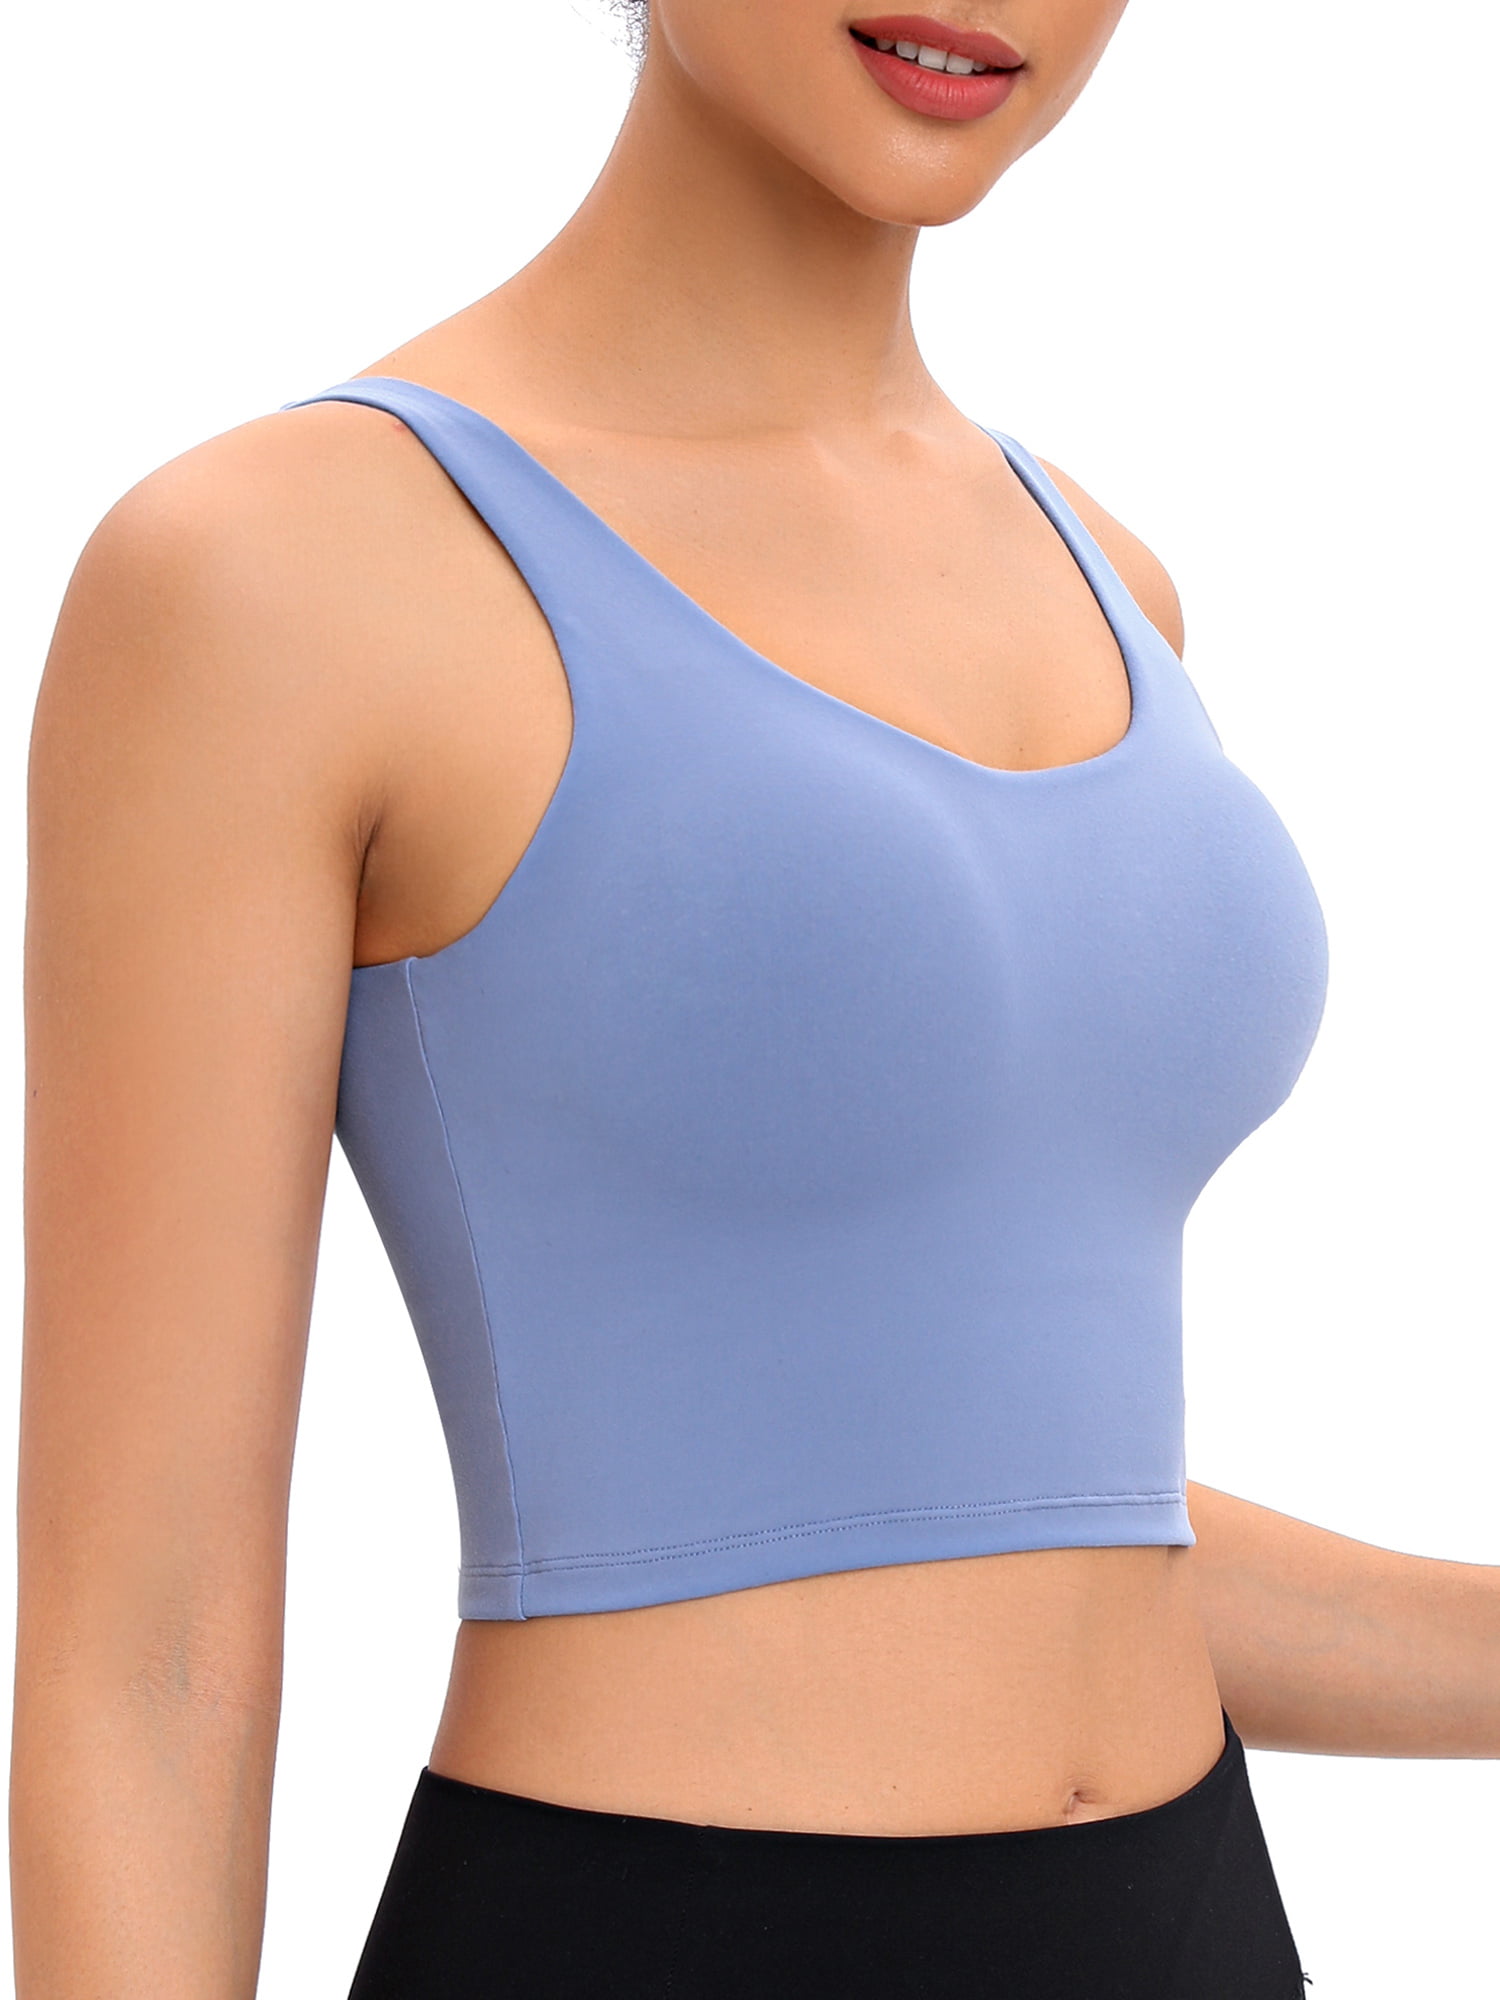 LELINTA Seamless Workout Tank Tops for Women Sexy Medium Support Athletic  Camisole Sports Shirts with Removable Cups 